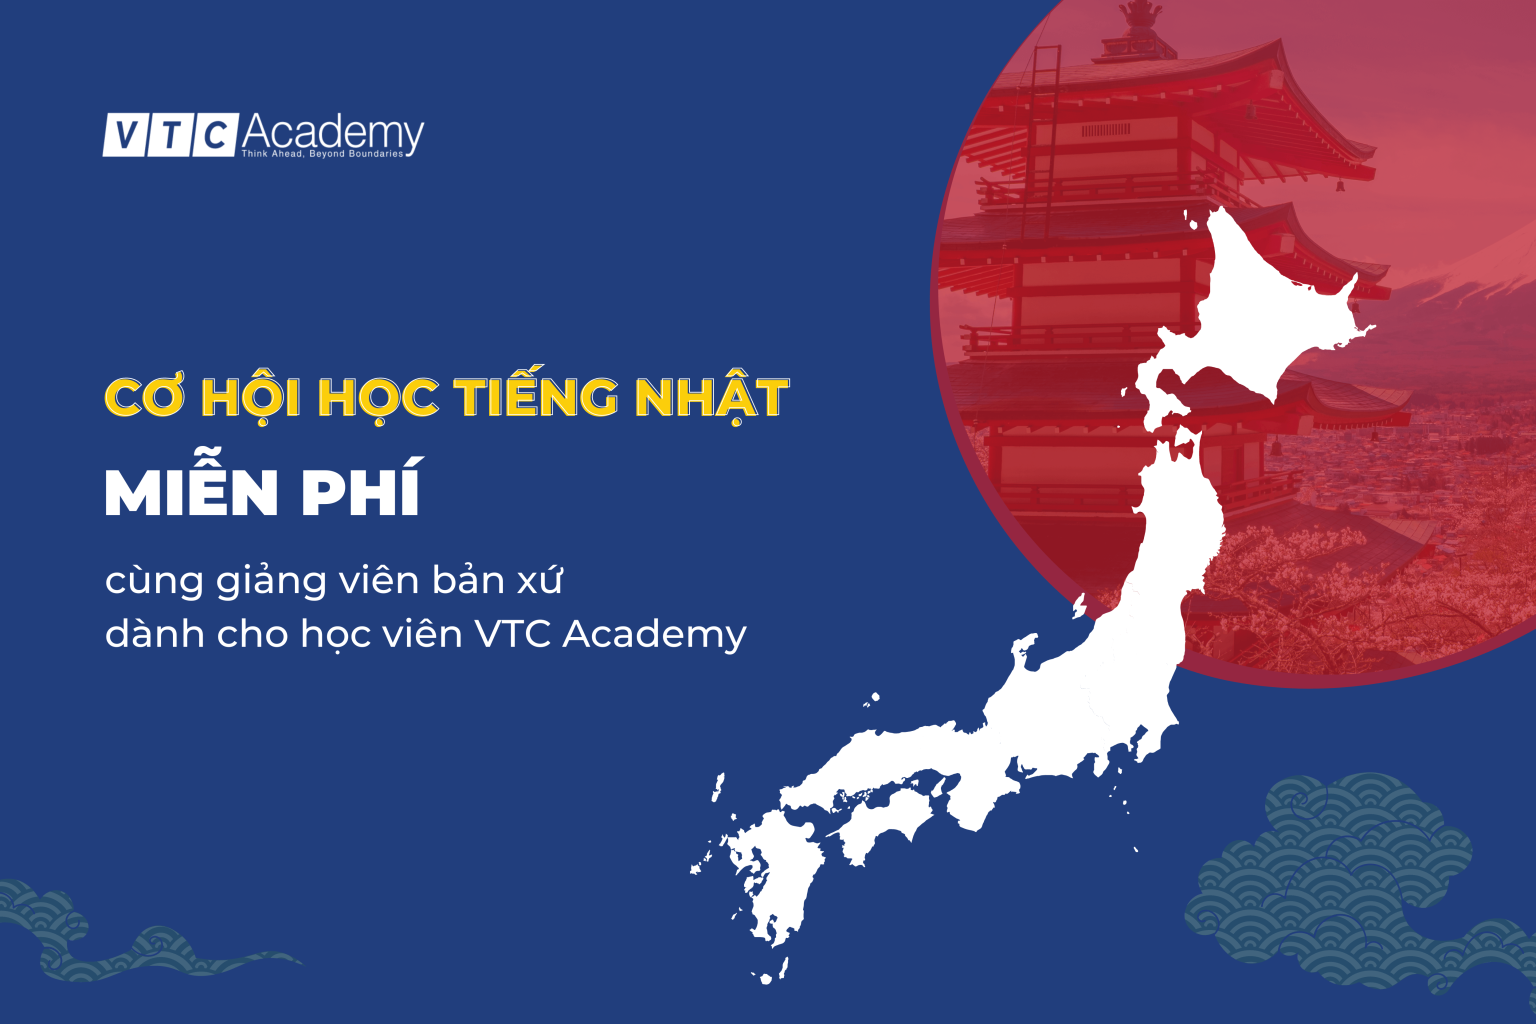 Free Japanese language course exclusive for VTC Academy students: Exciting and interactive classes with Japanese lecturers.